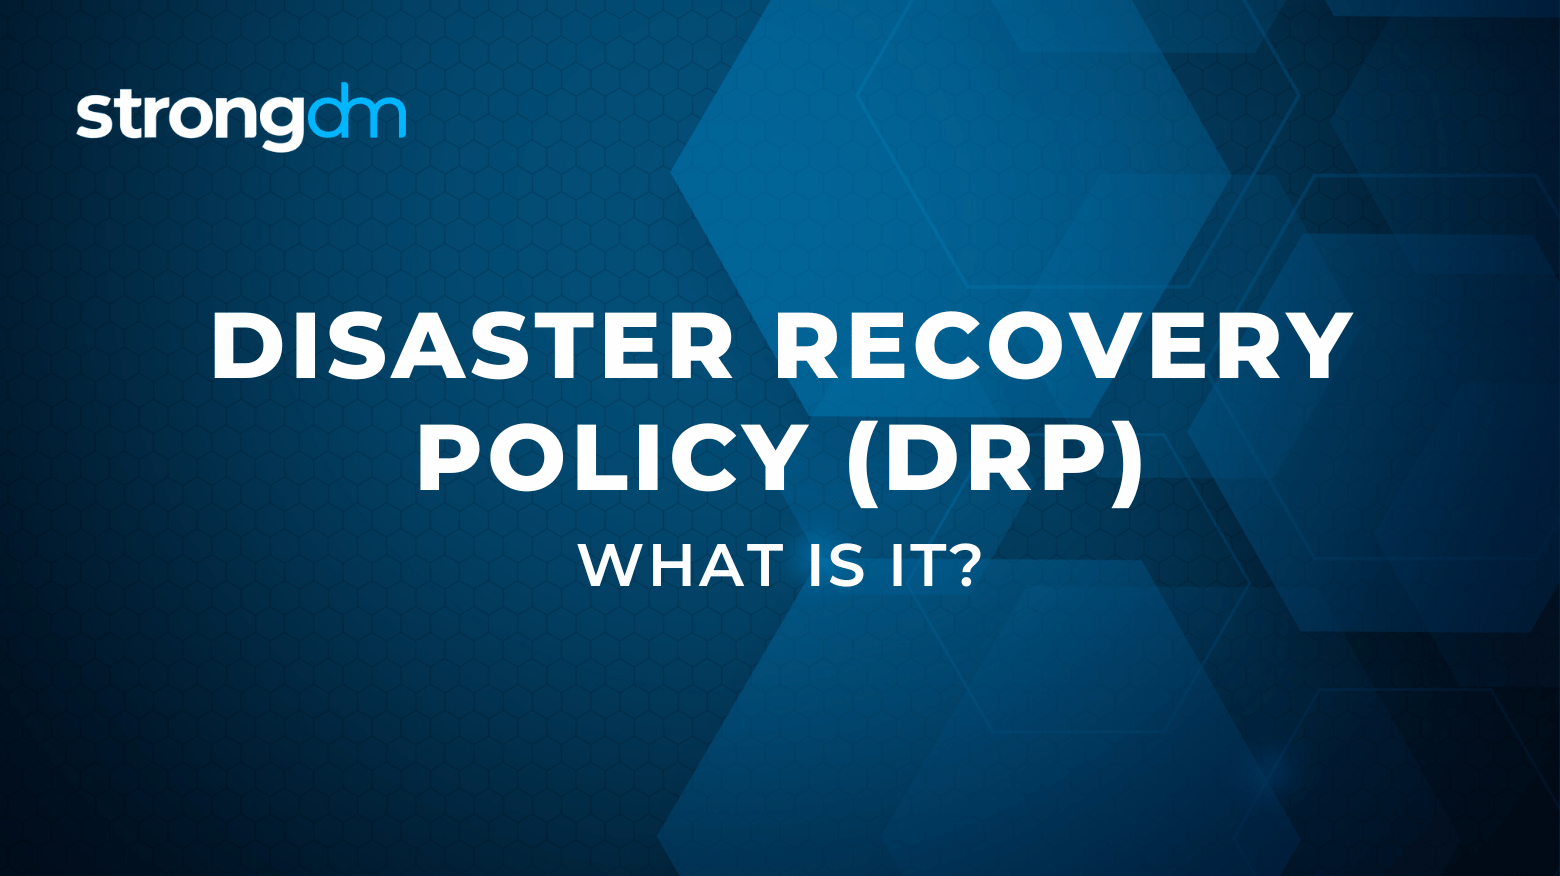 What is Disaster Recovery Policy (DRP)?